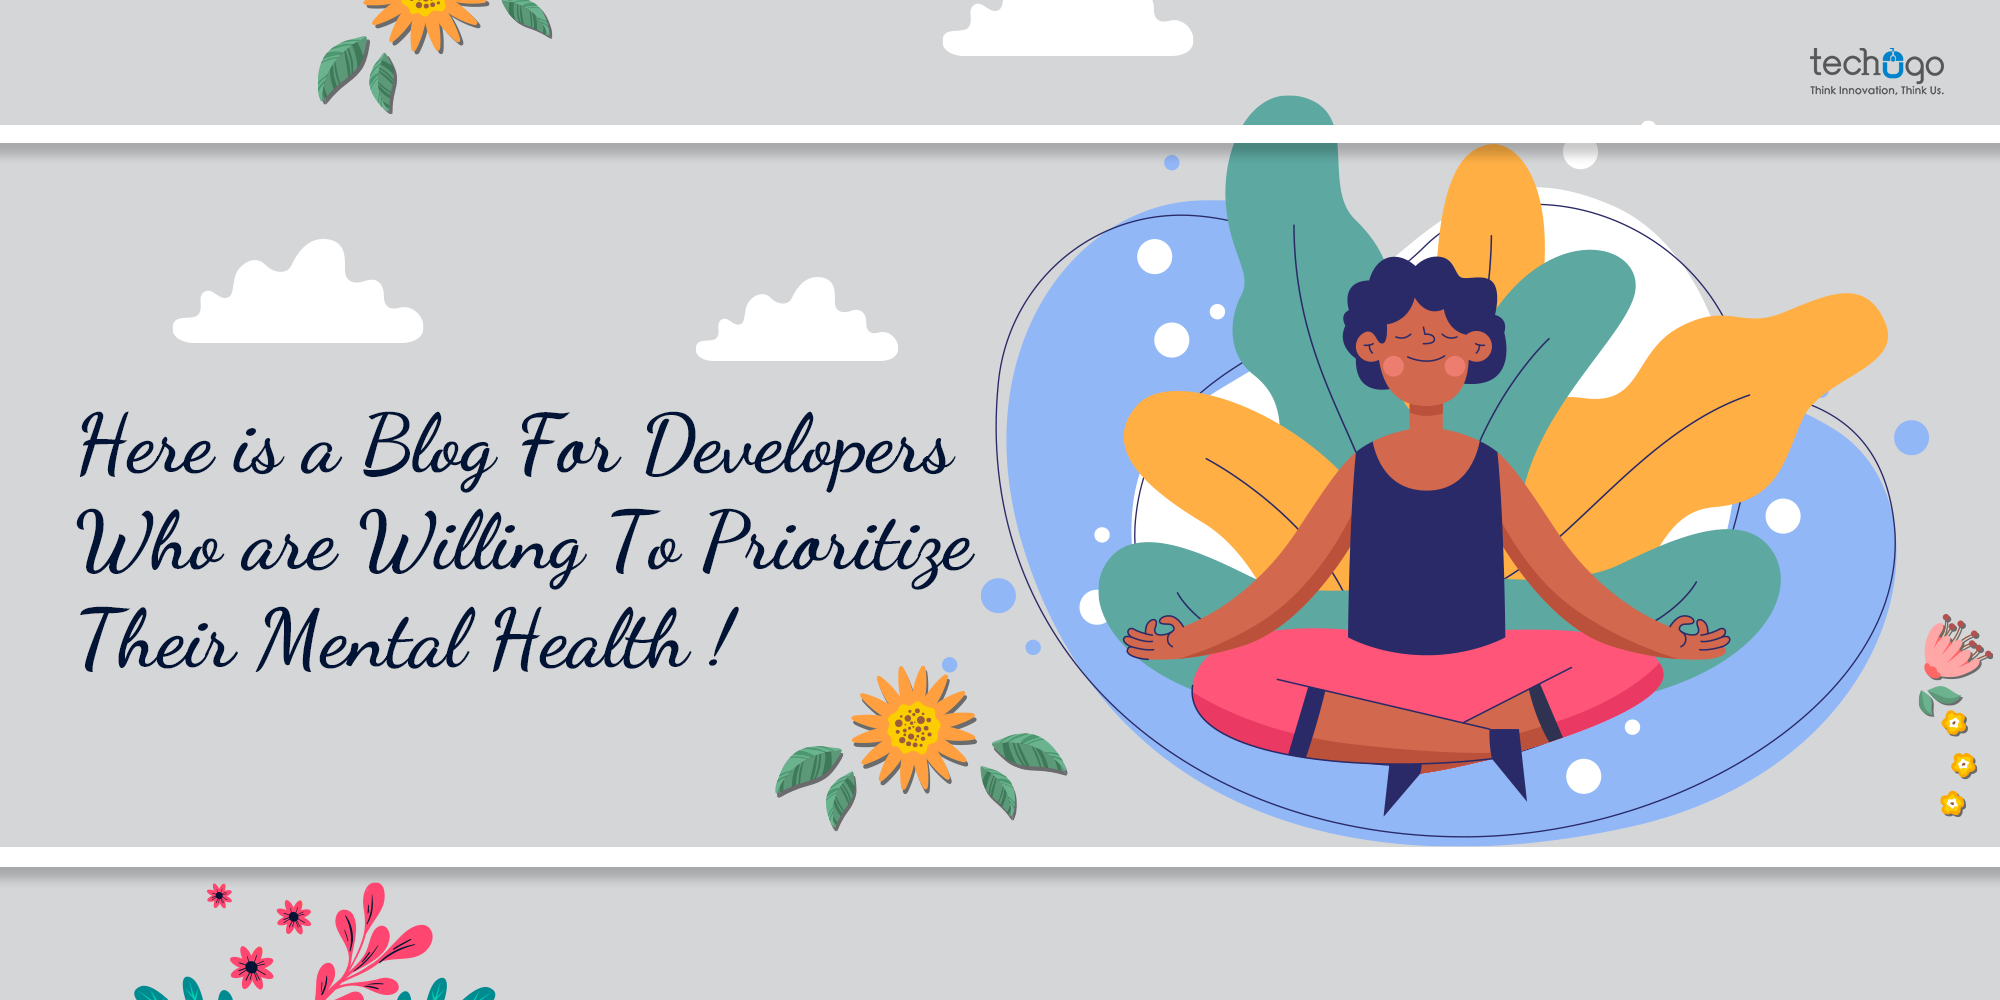 Here’s A Blog For Developers Who’re Willing To Prioritize Their Mental Health!